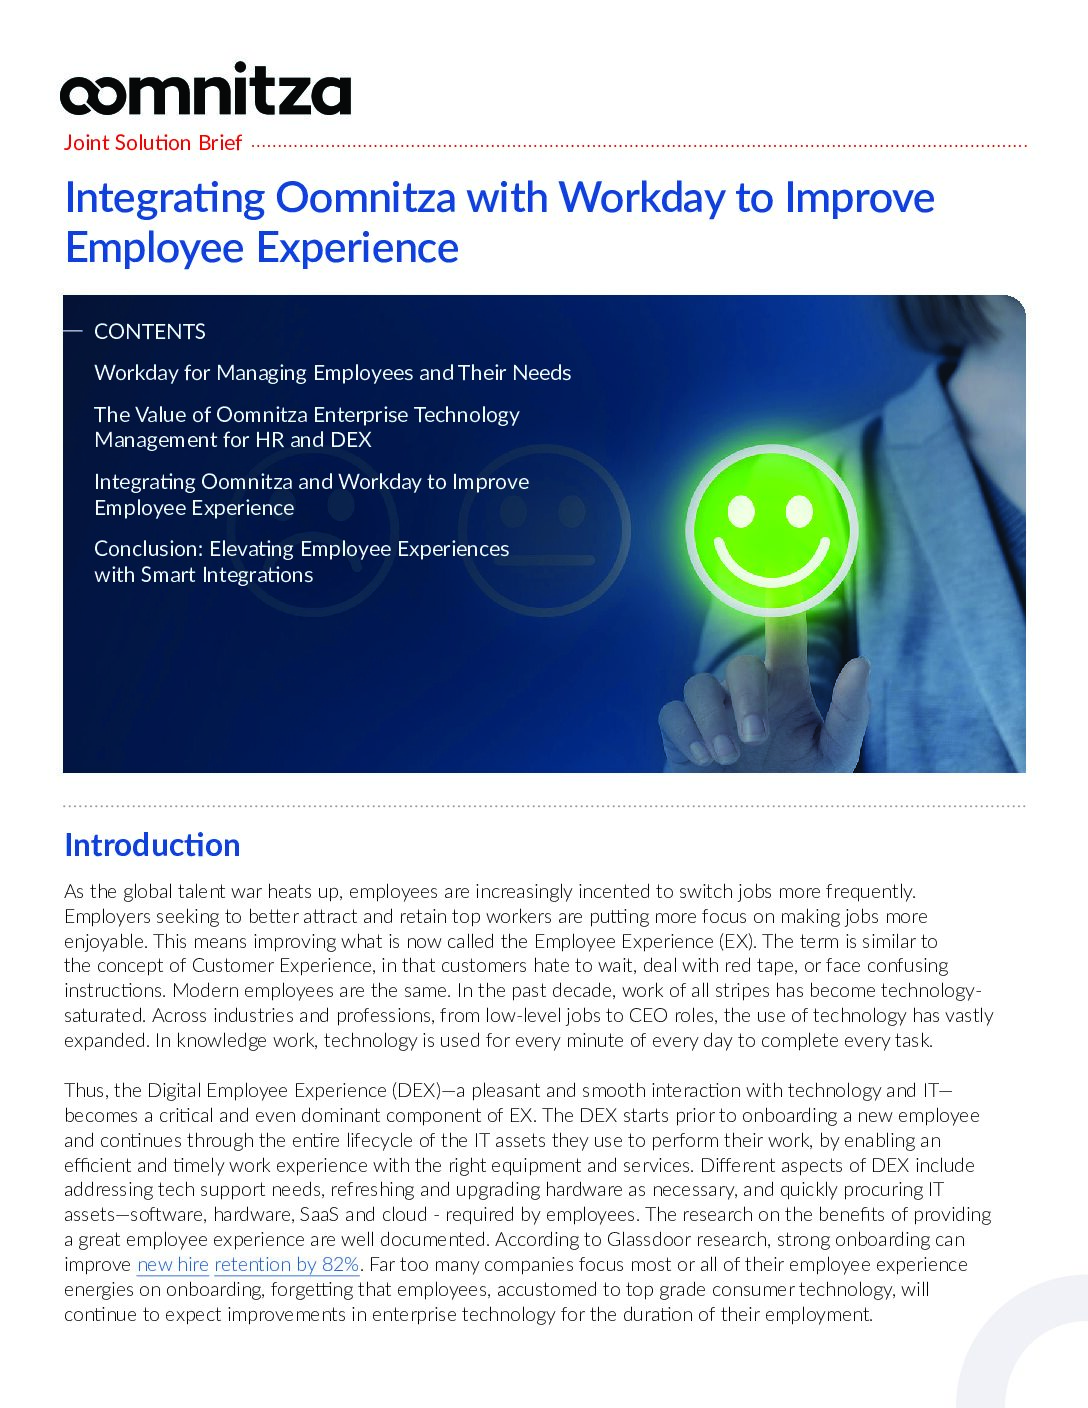 Featured image for Integrating Oomnitza with Workday to Improve Employee Experience